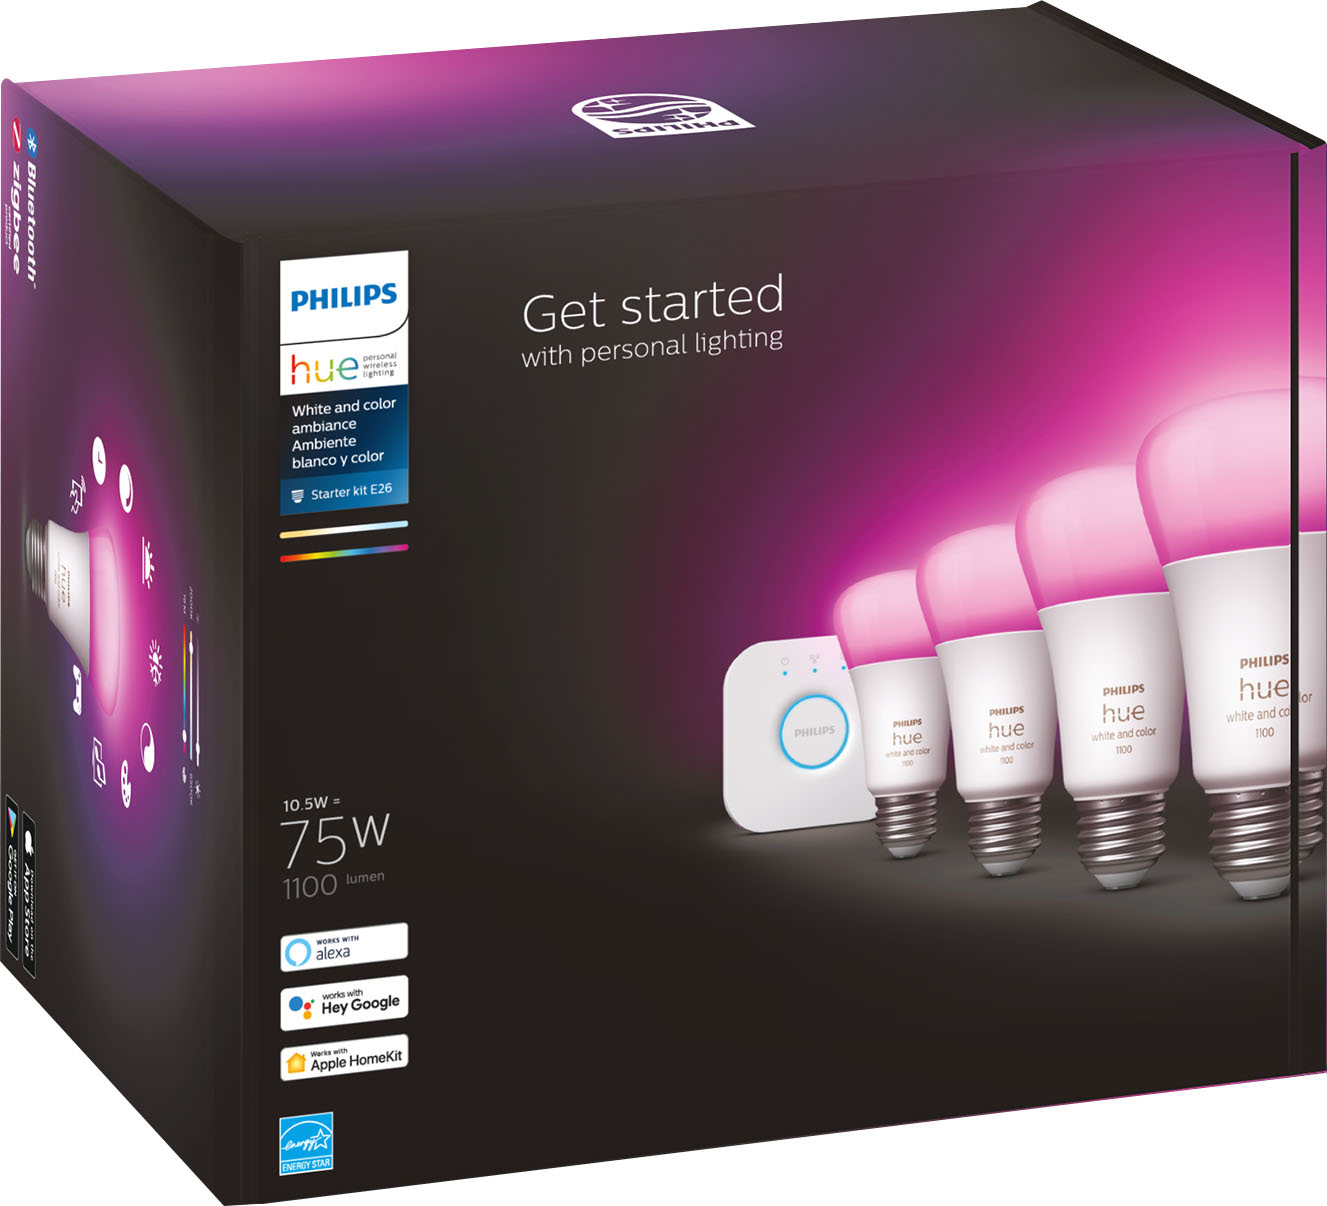 Philips Hue A19 Bluetooth 60W Smart LED Starter Kit White and